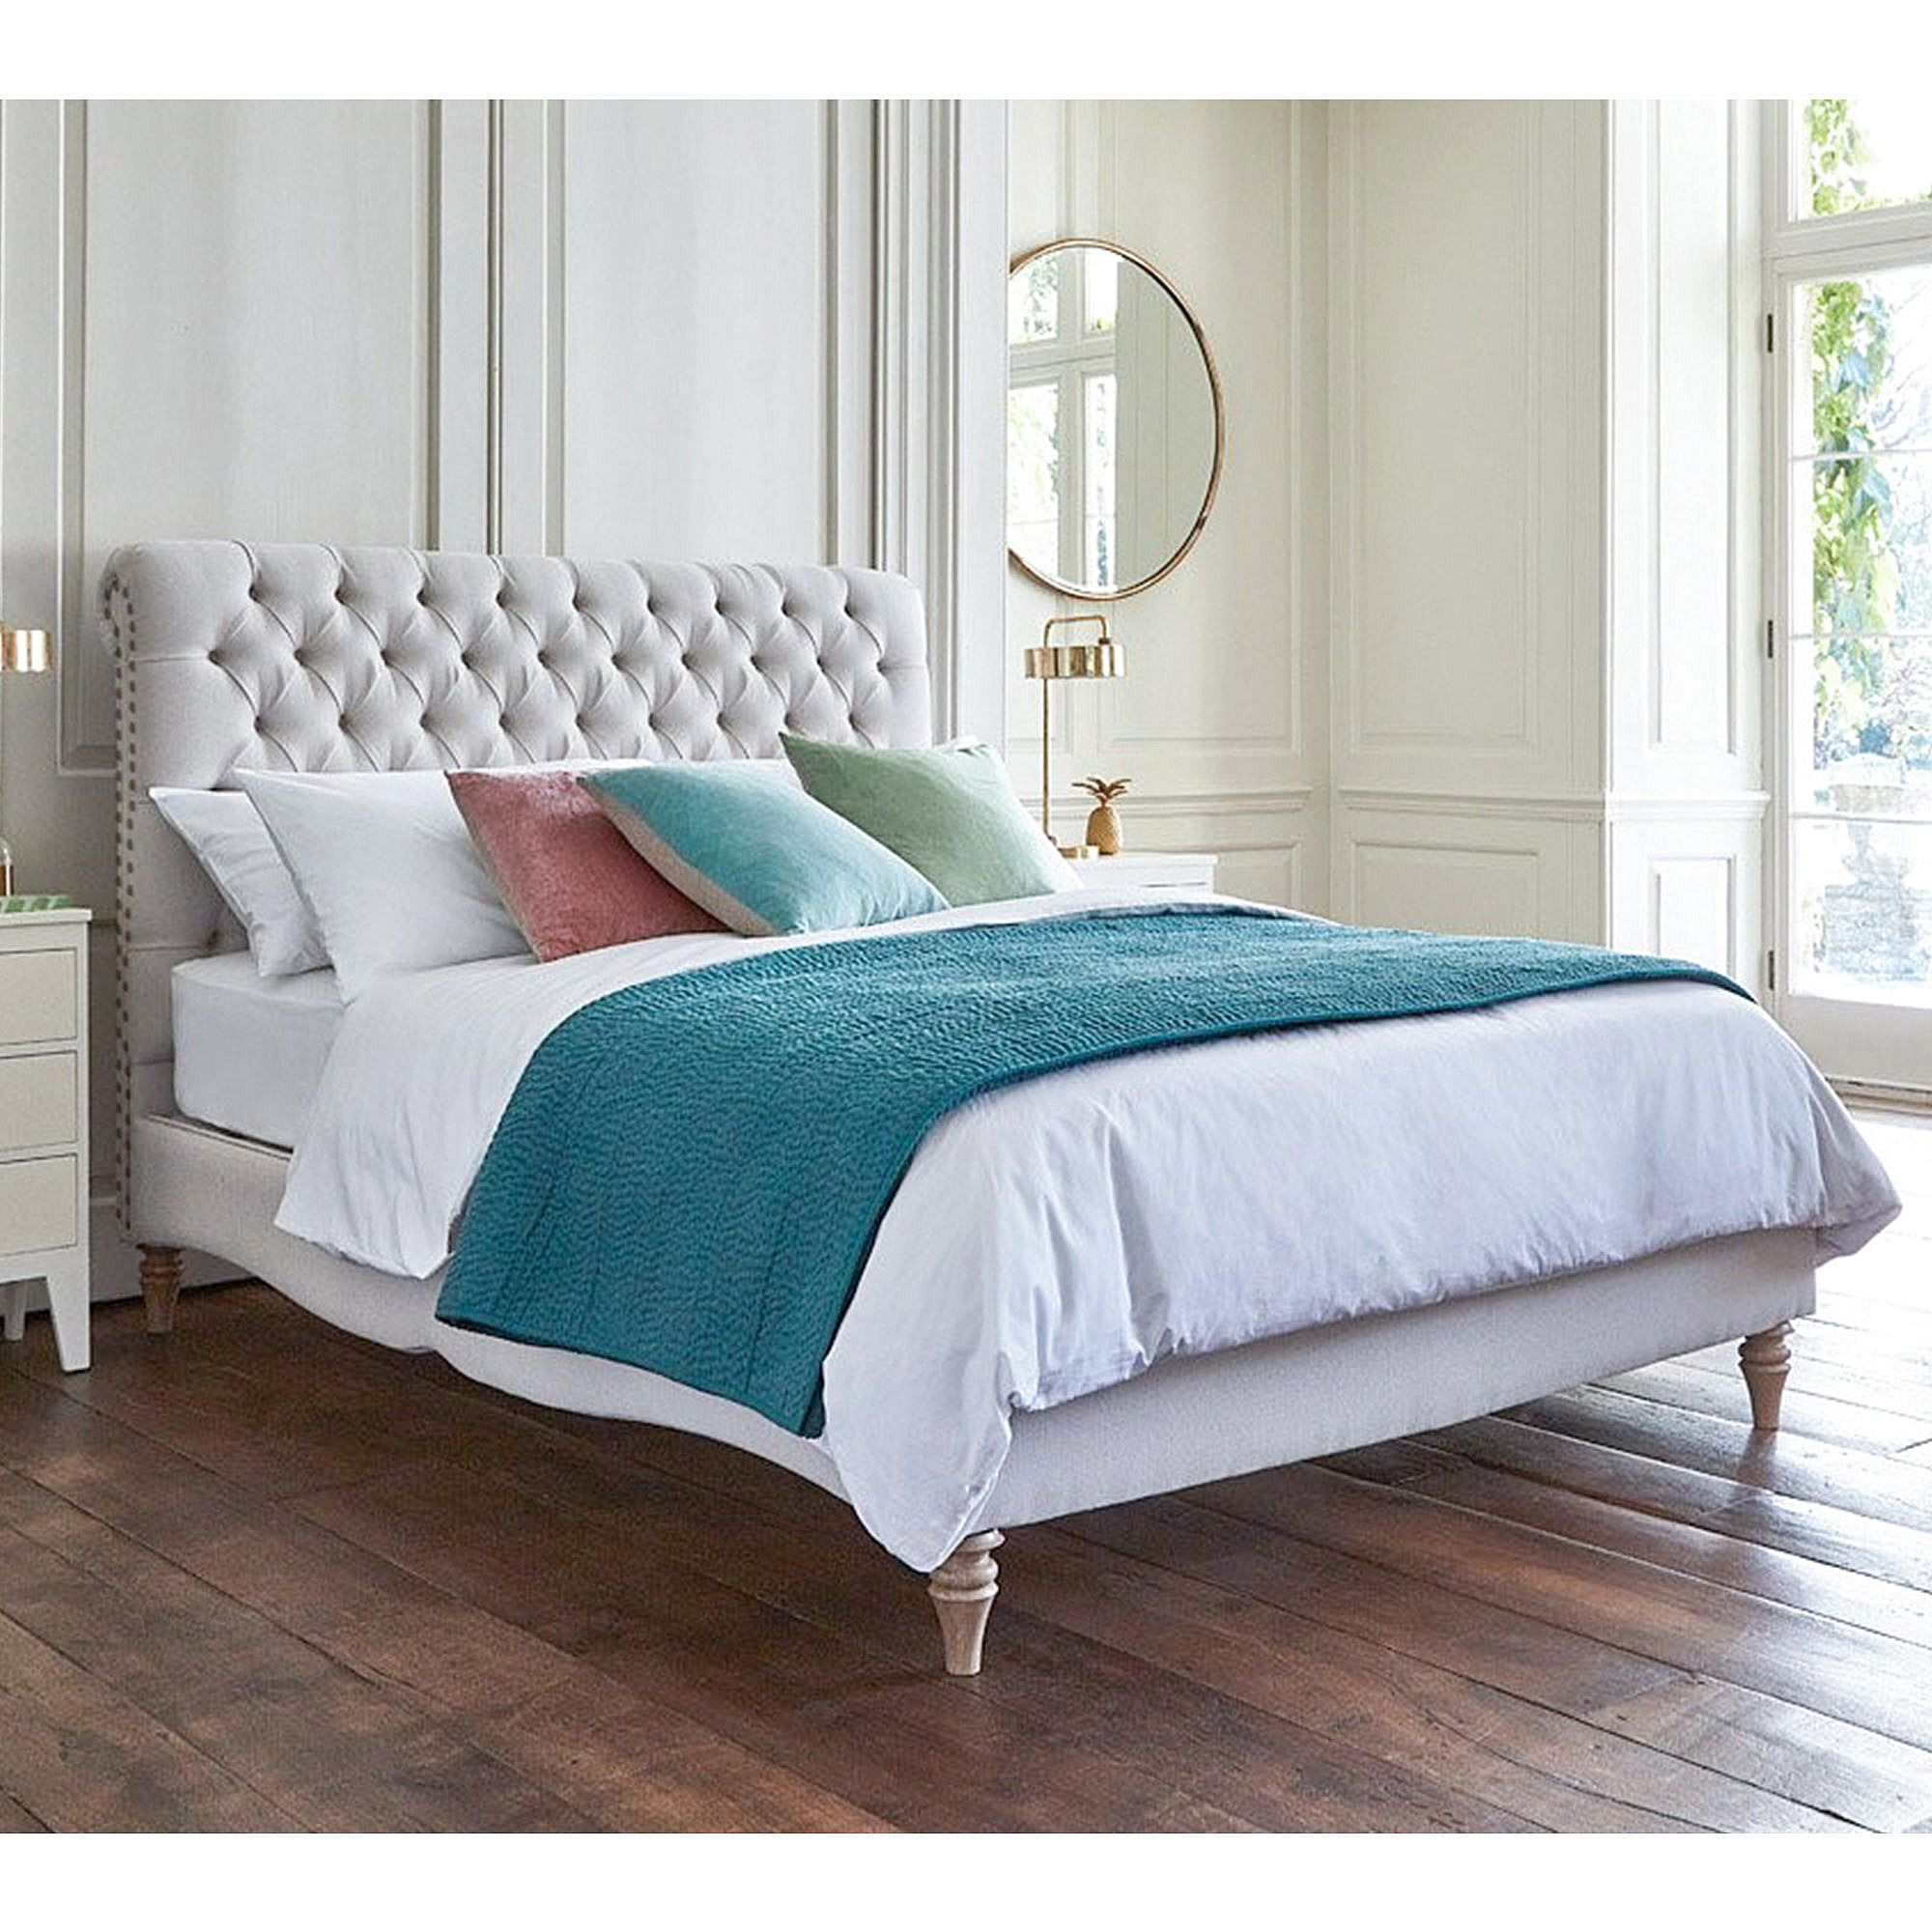 A Million Dreams Linen Upholstered Bed (Double) - image 1